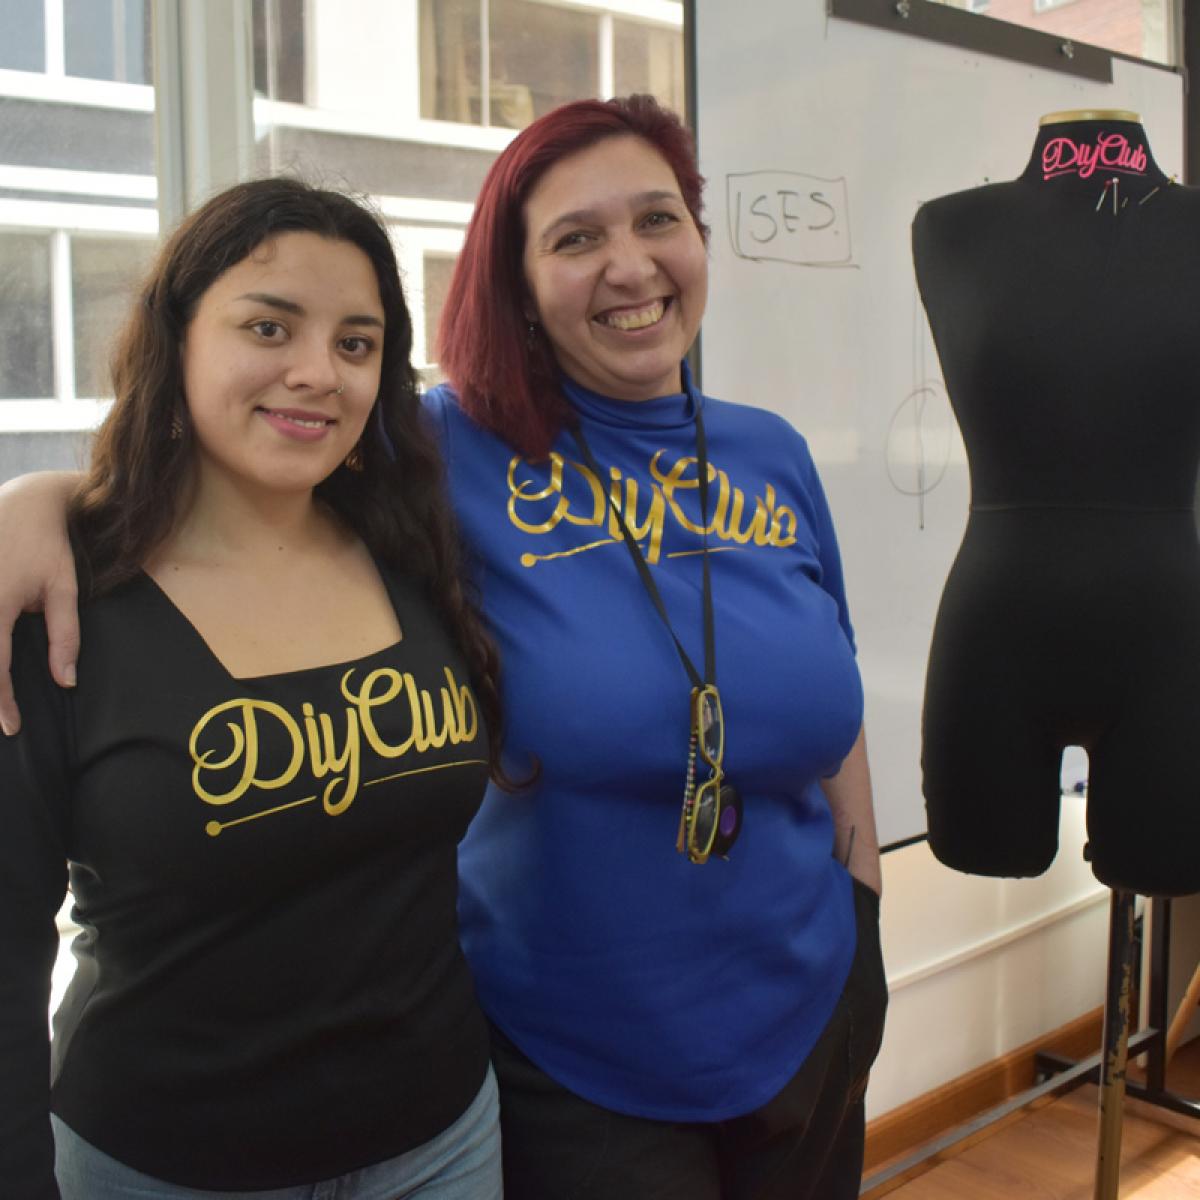 This pictures shows Laura and Dani standing in front of the camera with one arm around each other. They are both wearing shirts that read DIY Club. There is a pinnable mannequin next to them. 